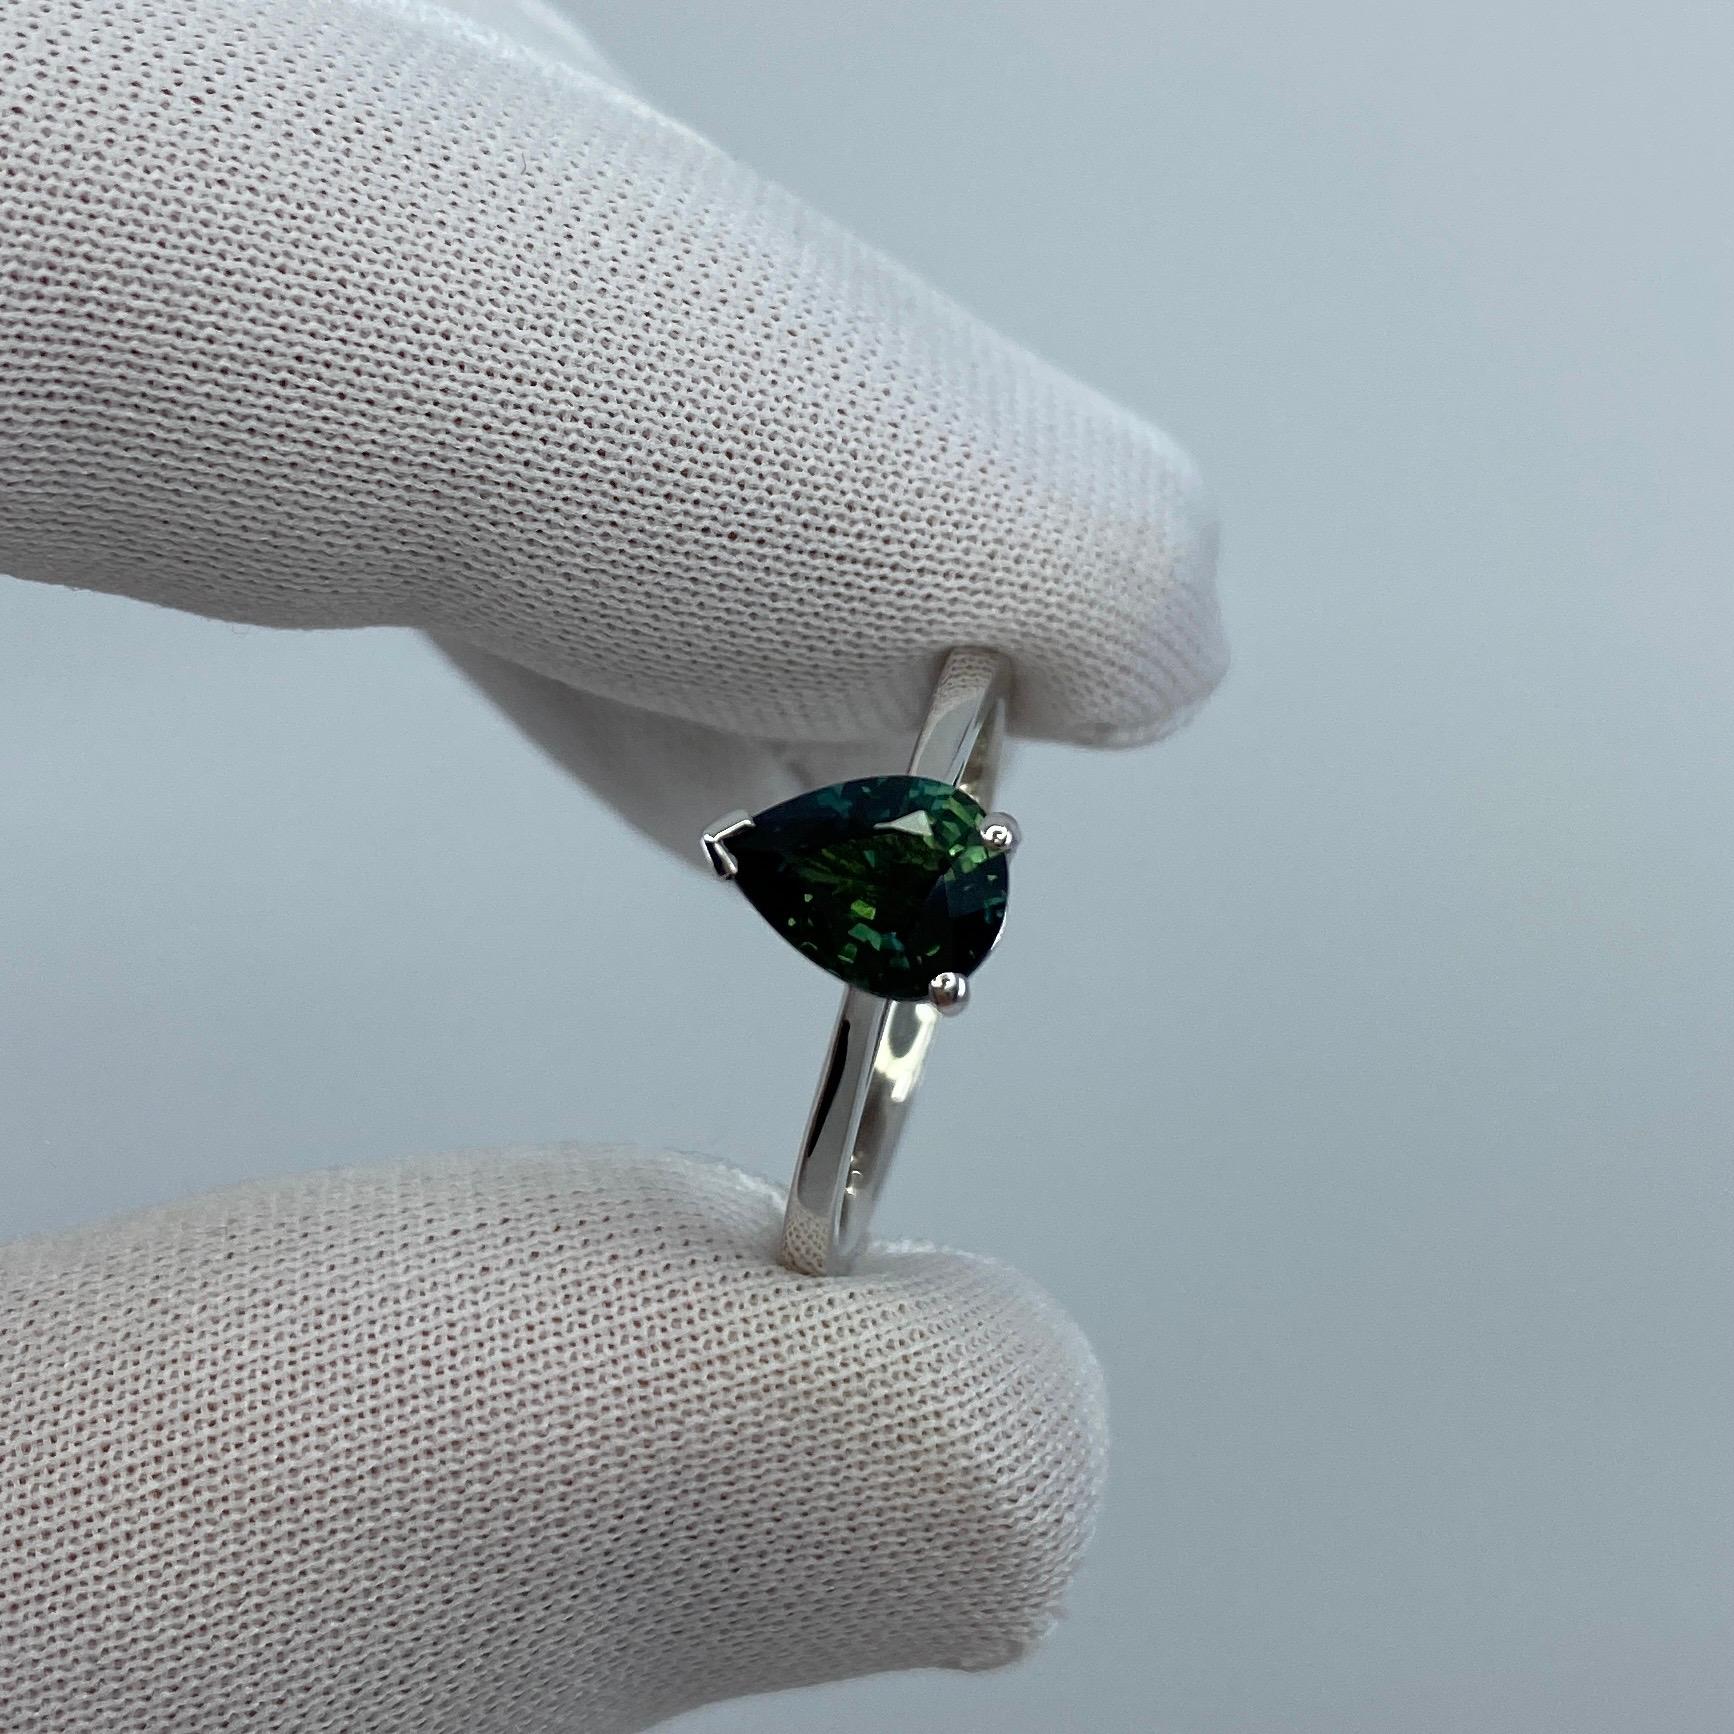 Natural Deep Blueish Green Sapphire 18k White Gold Solitaire Ring.

1.41 Carat sapphire with a stunning deep blue green colour and excellent clarity. Very clean stone with only some small natural inclusions visible when looking closely.
The sapphire